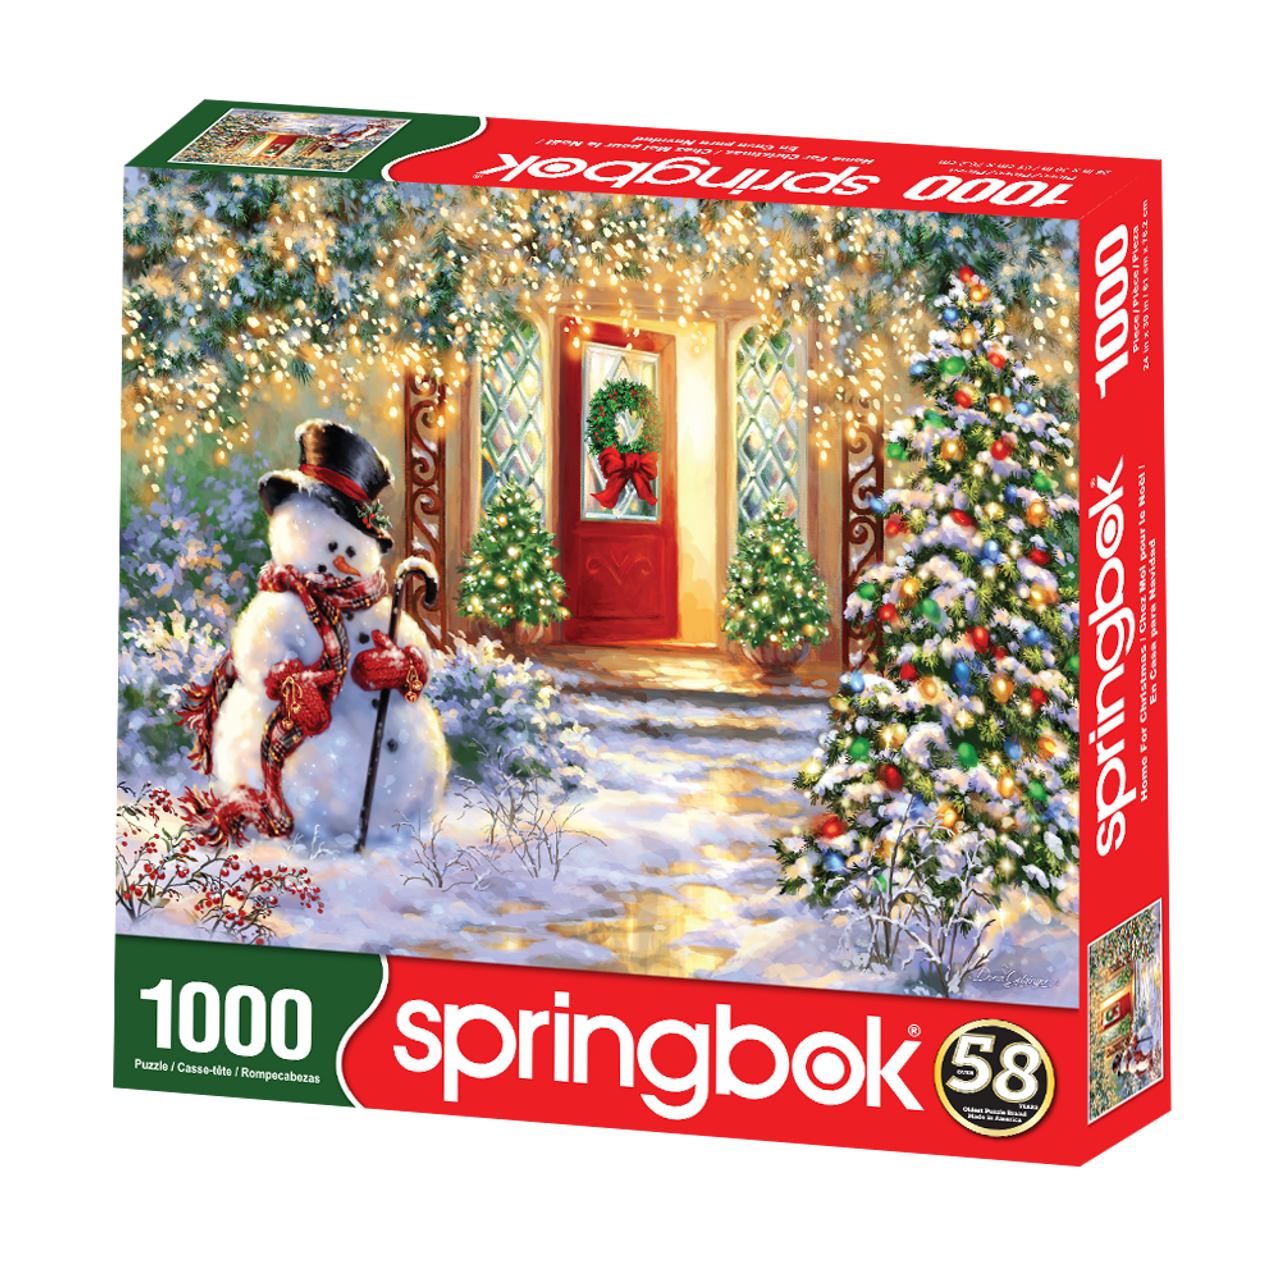 Home for Christmas 1000 Piece Jigsaw Puzzle - Allied Products Corp